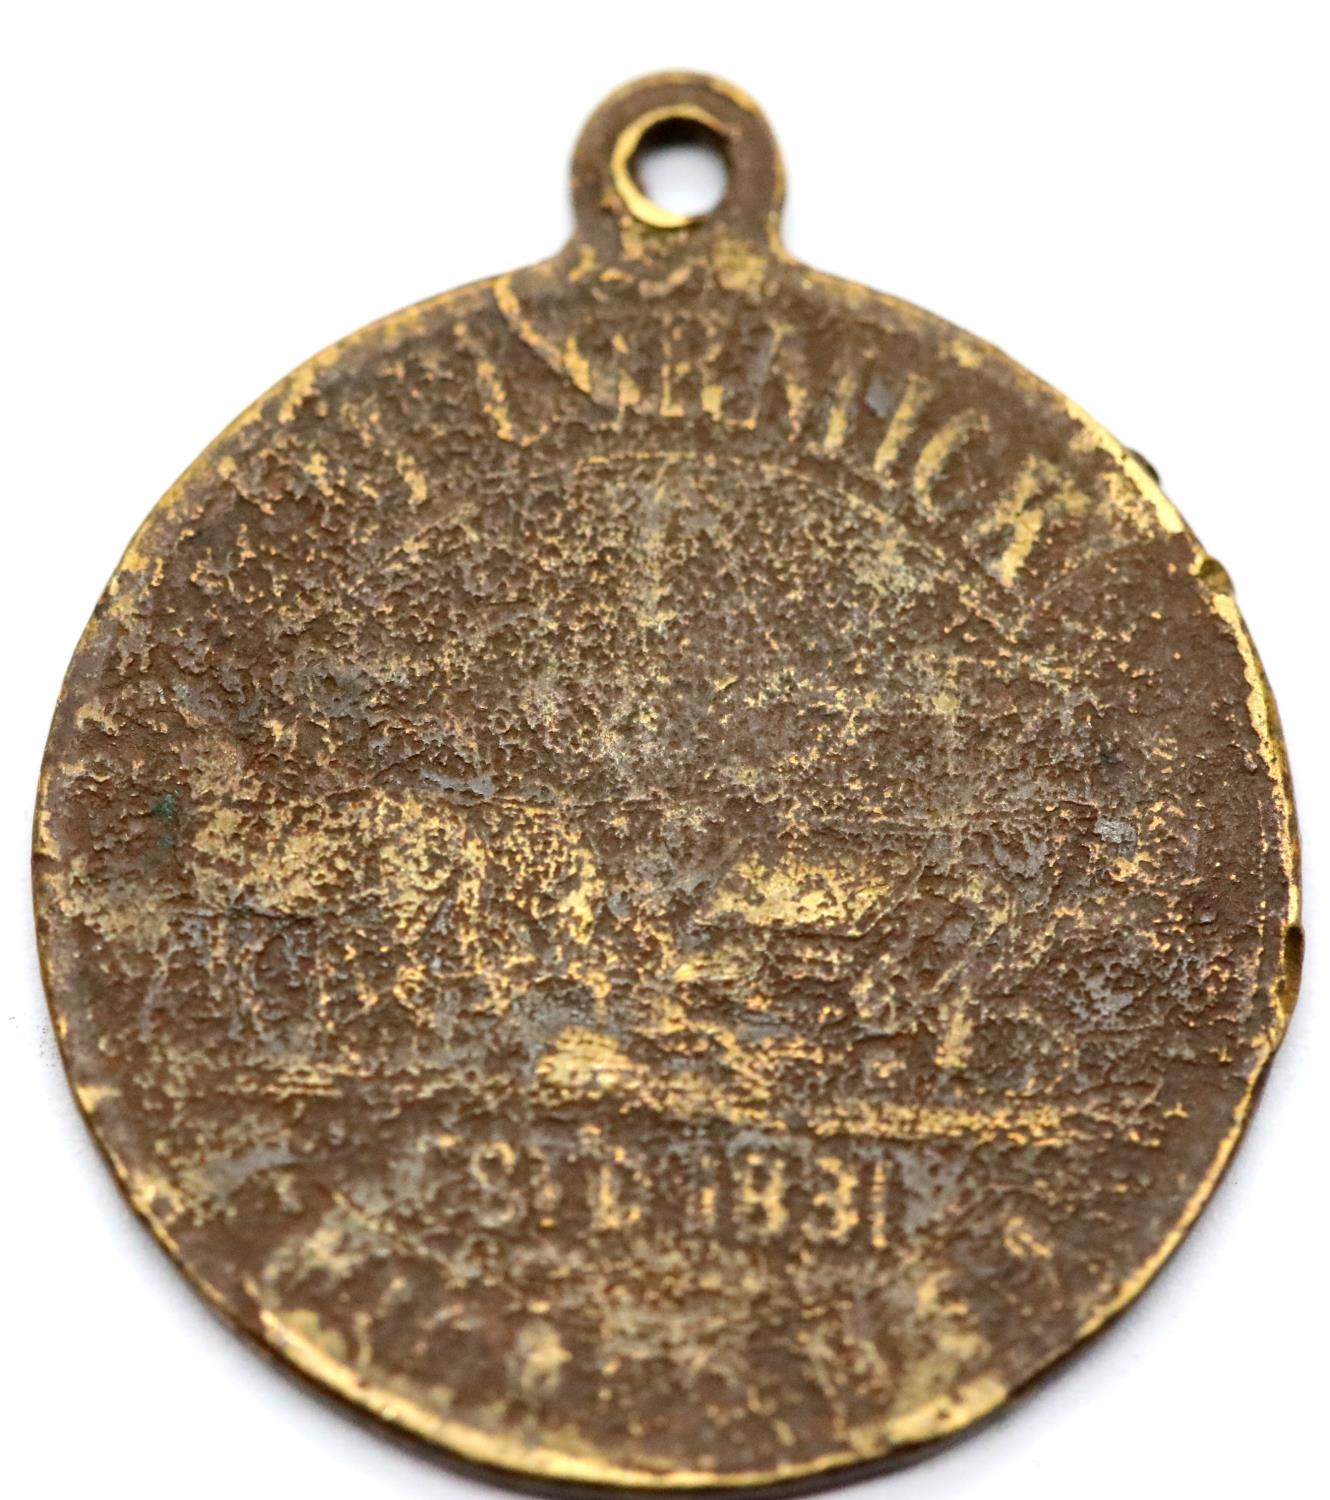 Worn brass McCormick medal. P&P Group 1 (£14+VAT for the first lot and £1+VAT for subsequent lots)